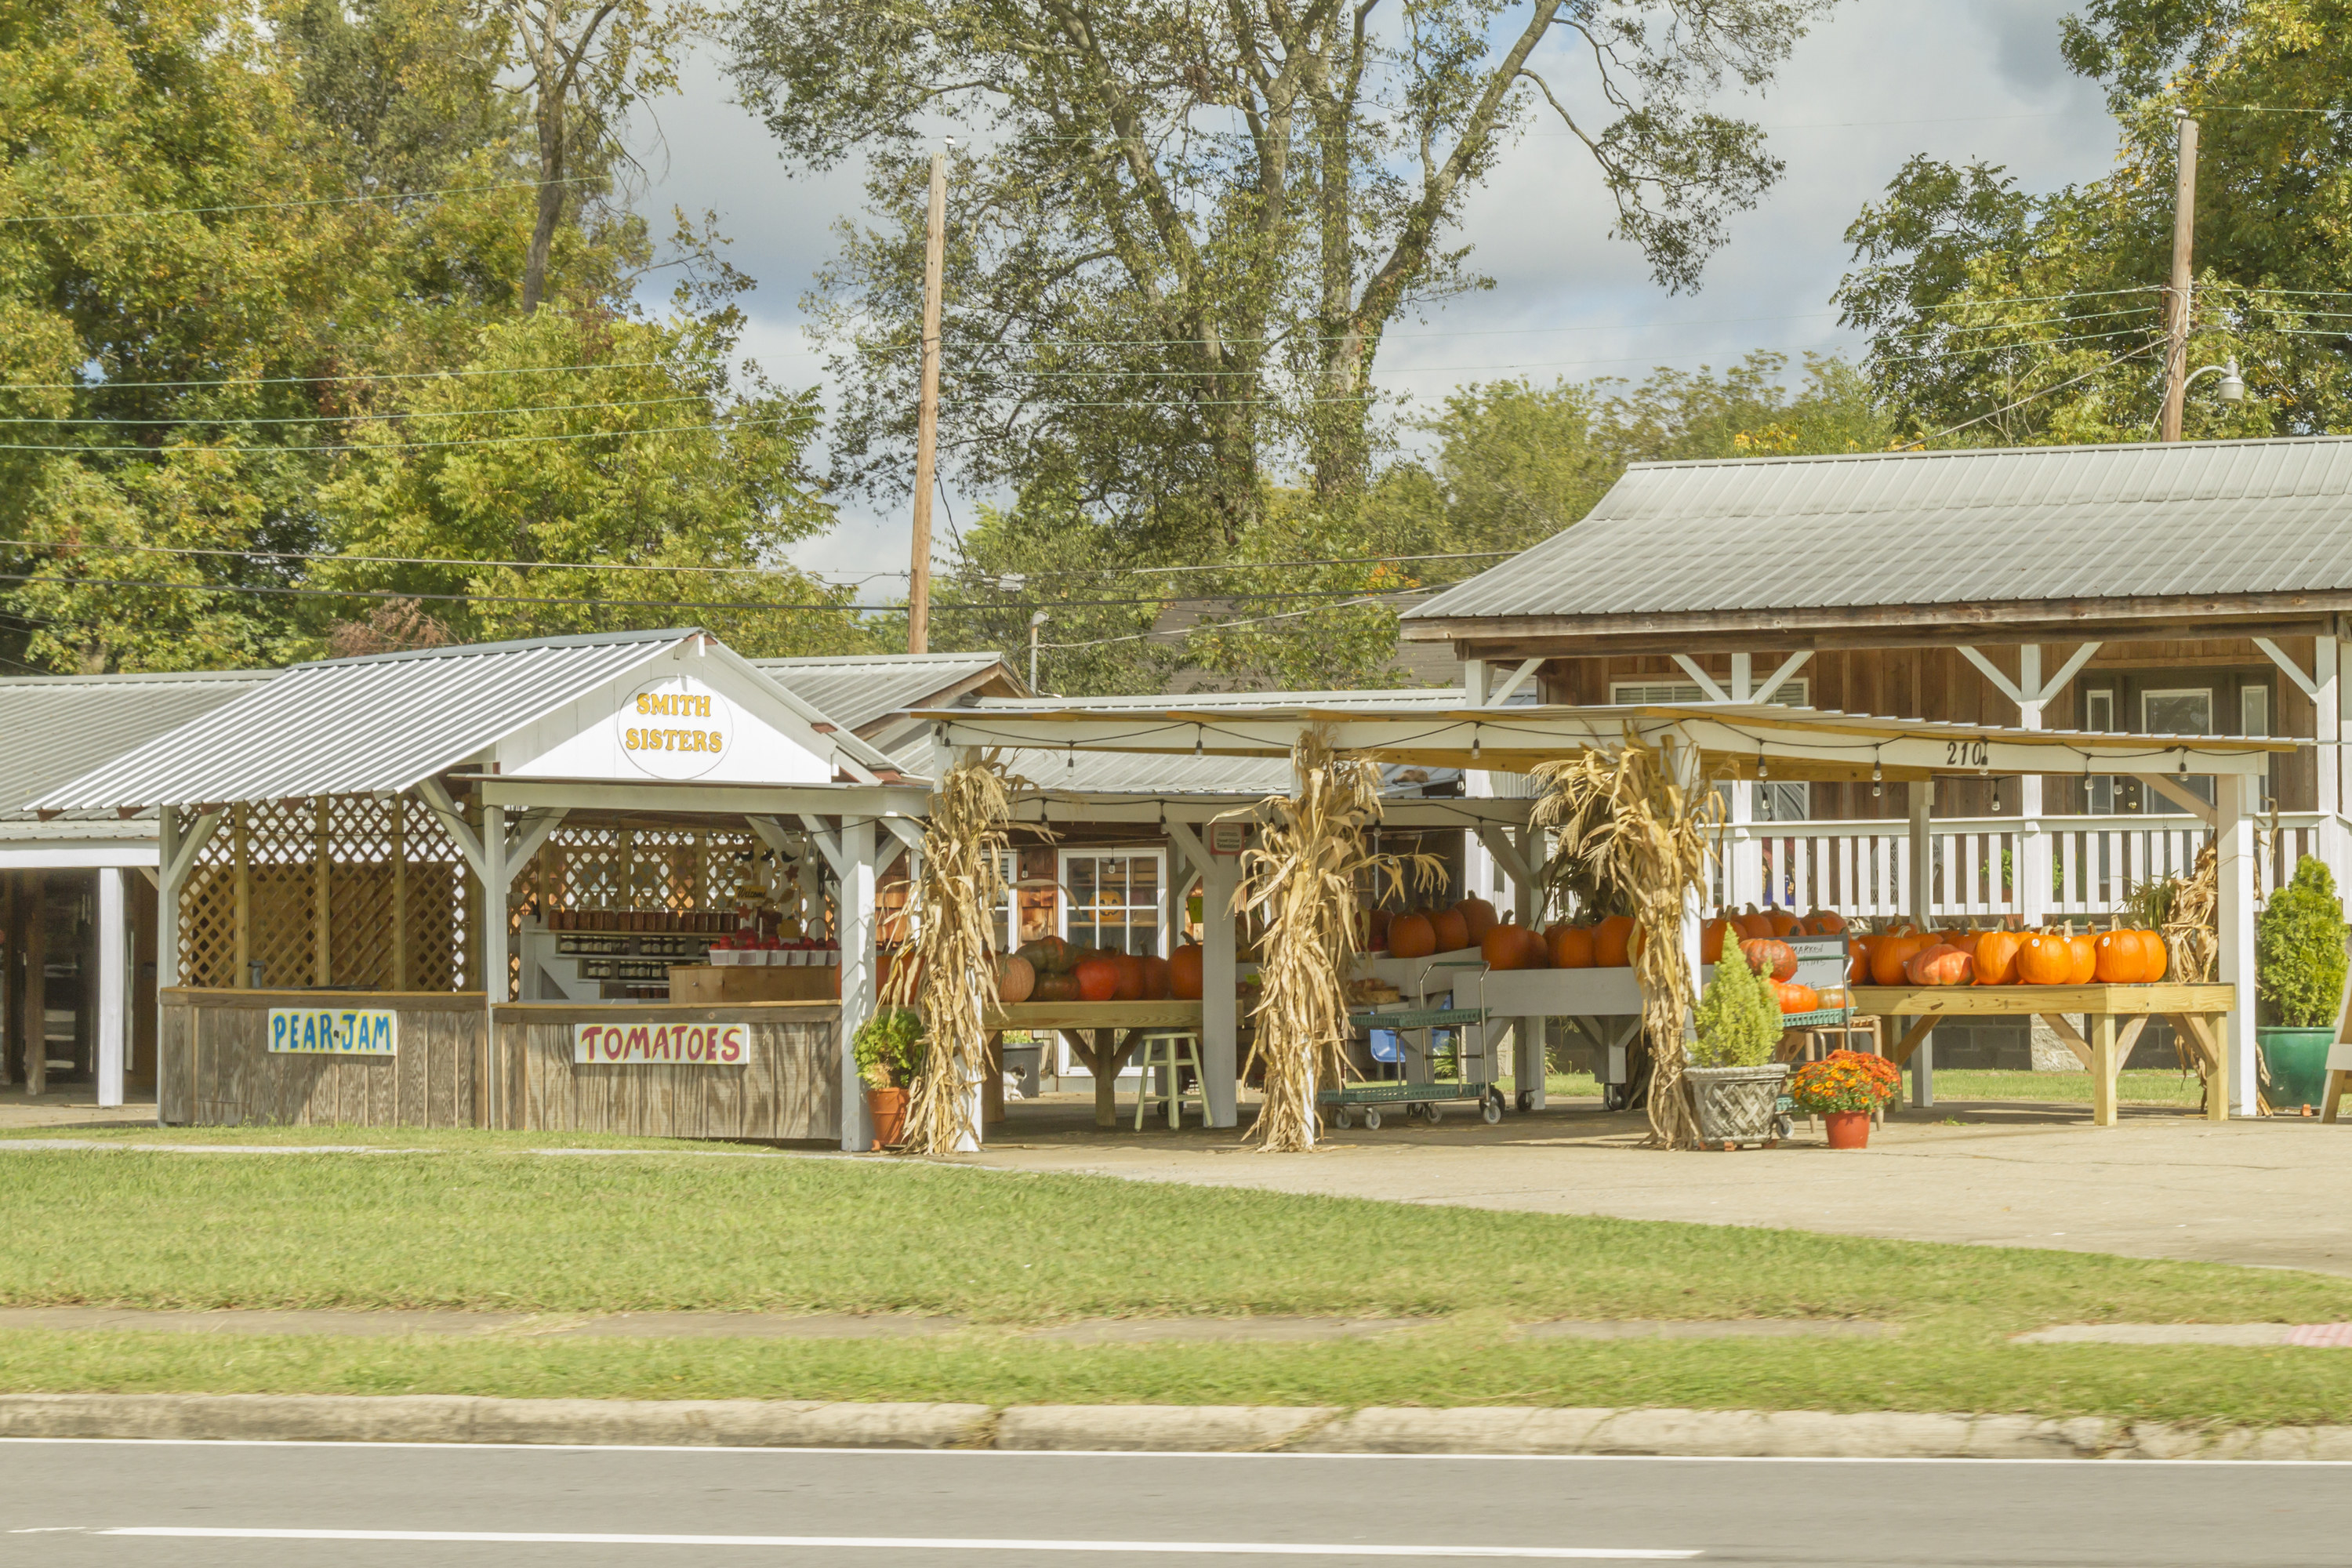 General view of farm market selling pumpkins for decorations